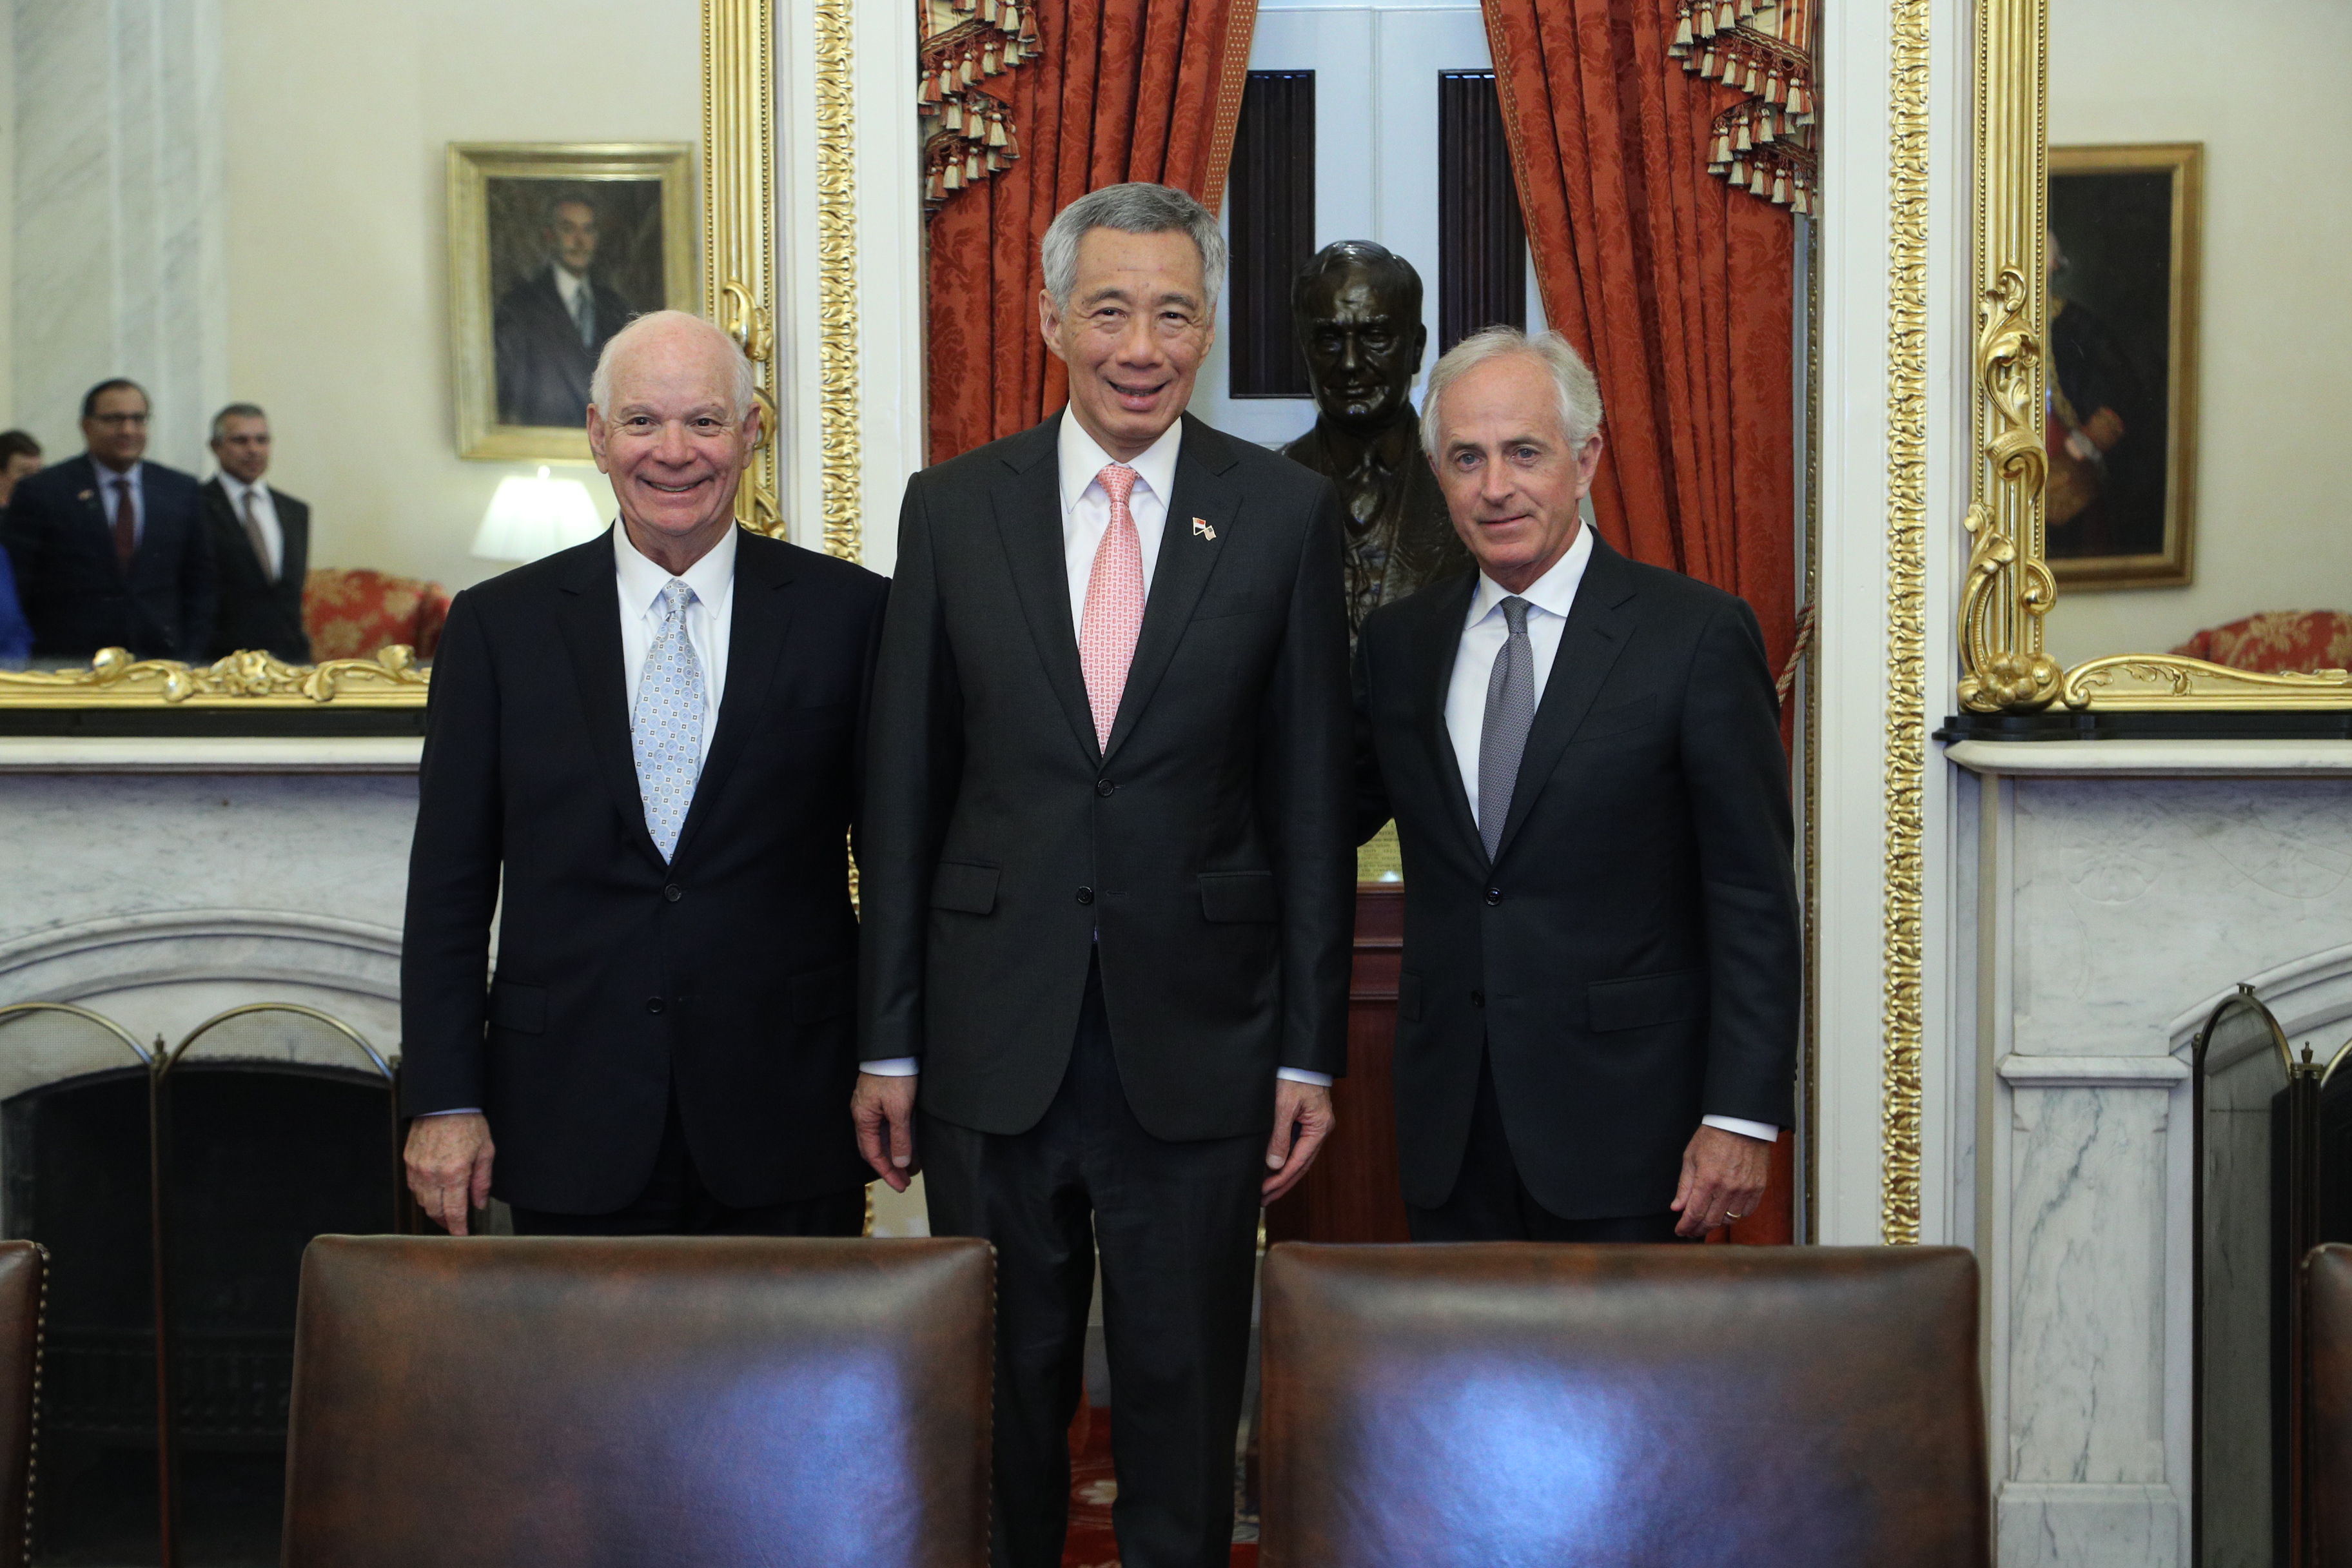 PM Lee Hsien Loong meeting with Senate Foreign Relations Committee Chairman Bob Corker and Senate Foreign Relations Committee Ranking Member Ben Cardin on 25 Oct 2017 (MCI Photo by Kenji Soon)